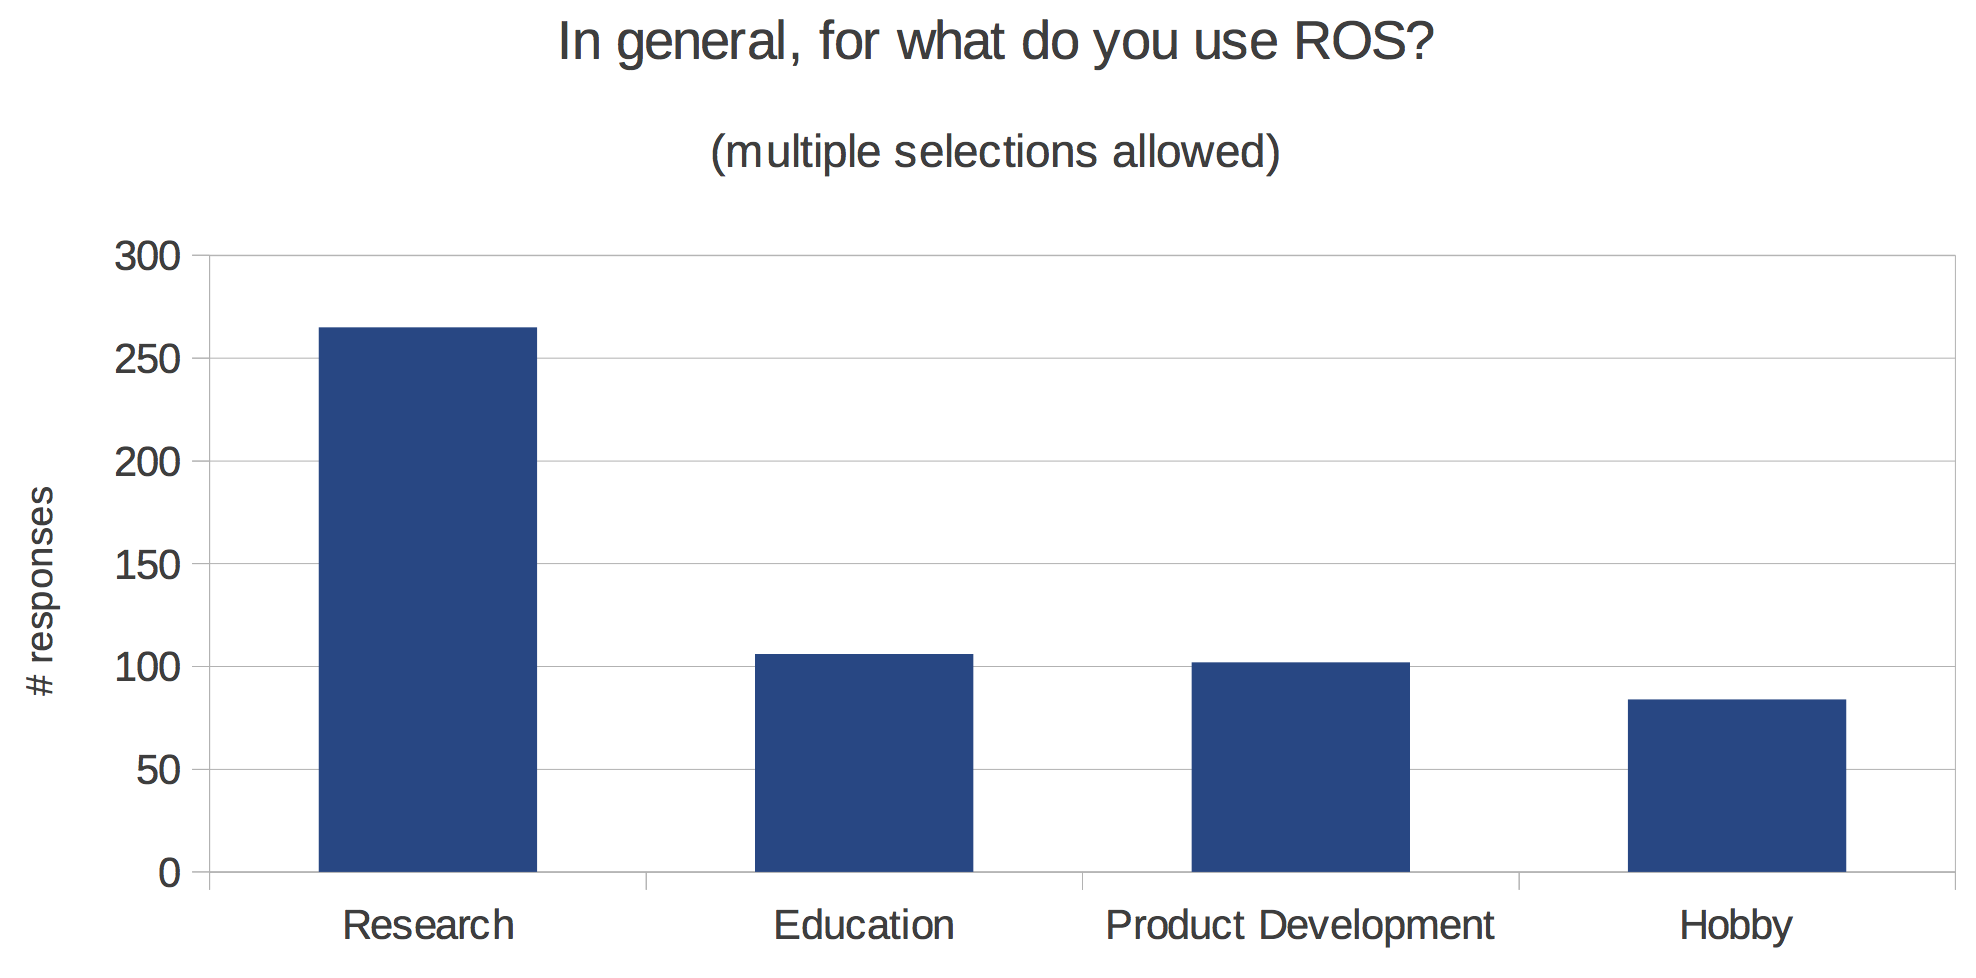 http://www.ros.org/news/2014/04/01/for-what-do-you-use-ros.png